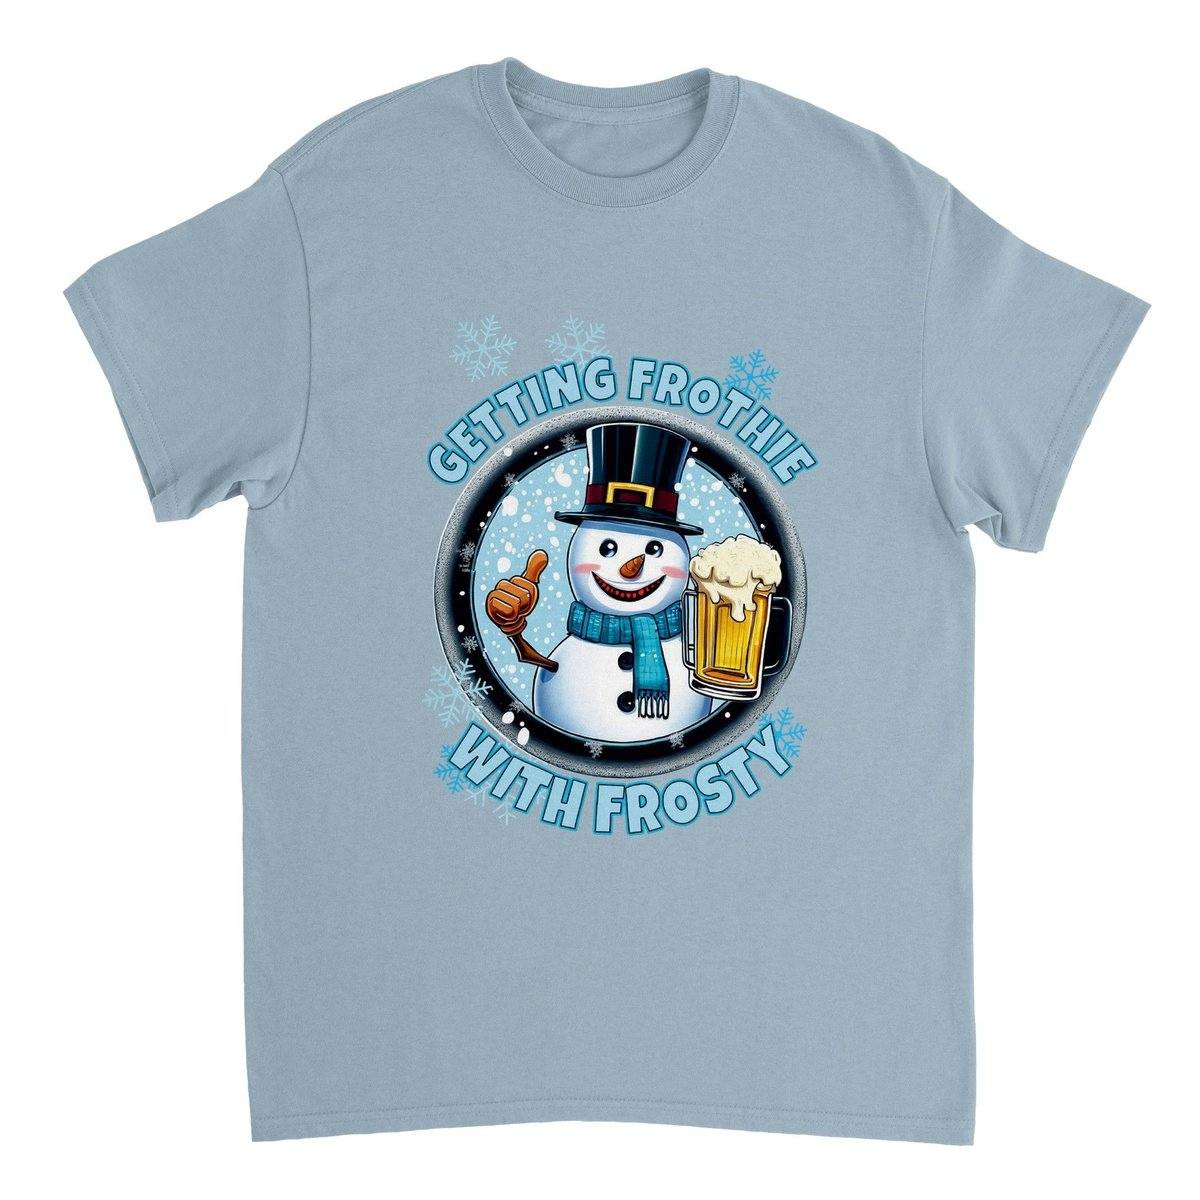 Getting Frothie With Frosty T-SHIRT Australia Online Color Light Blue / S